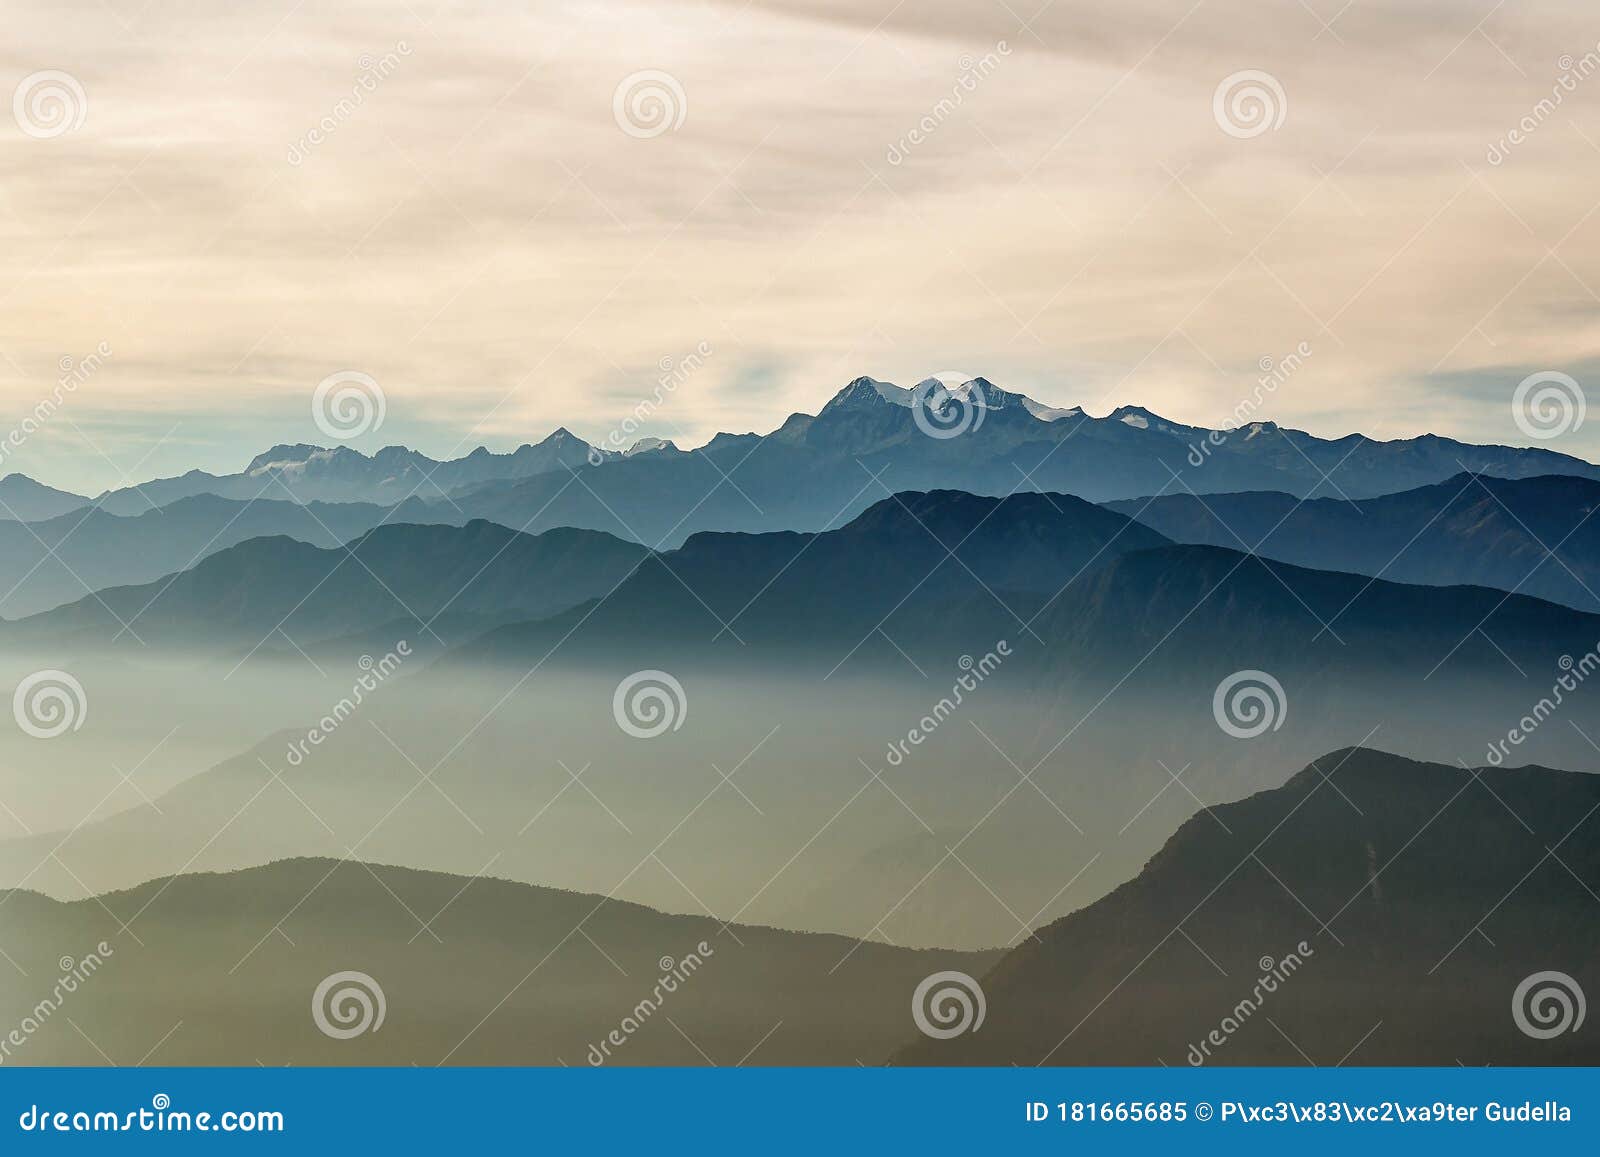 mountain peaks above moving clouds and mist